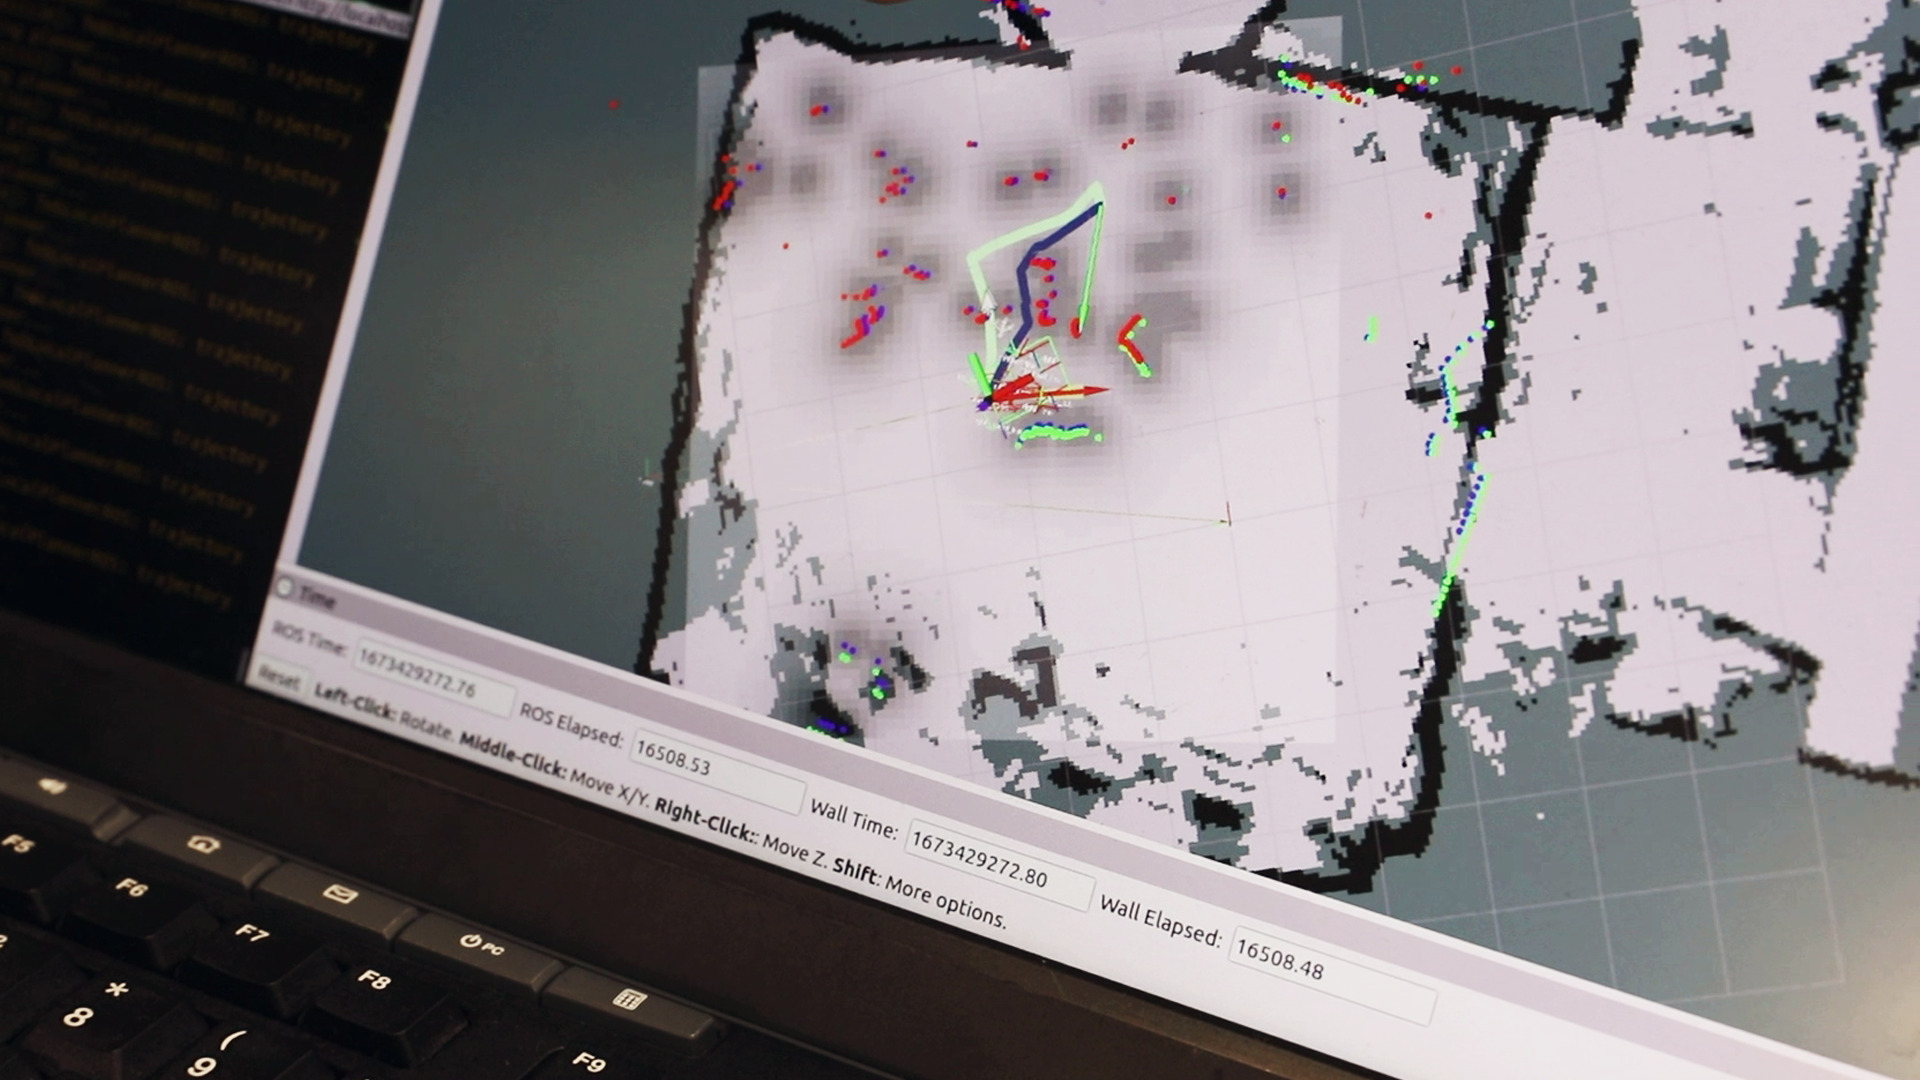 (Right) A close-up of the map developed by the autonomous robots from data obtained from LIDAR sensors on its wheels.